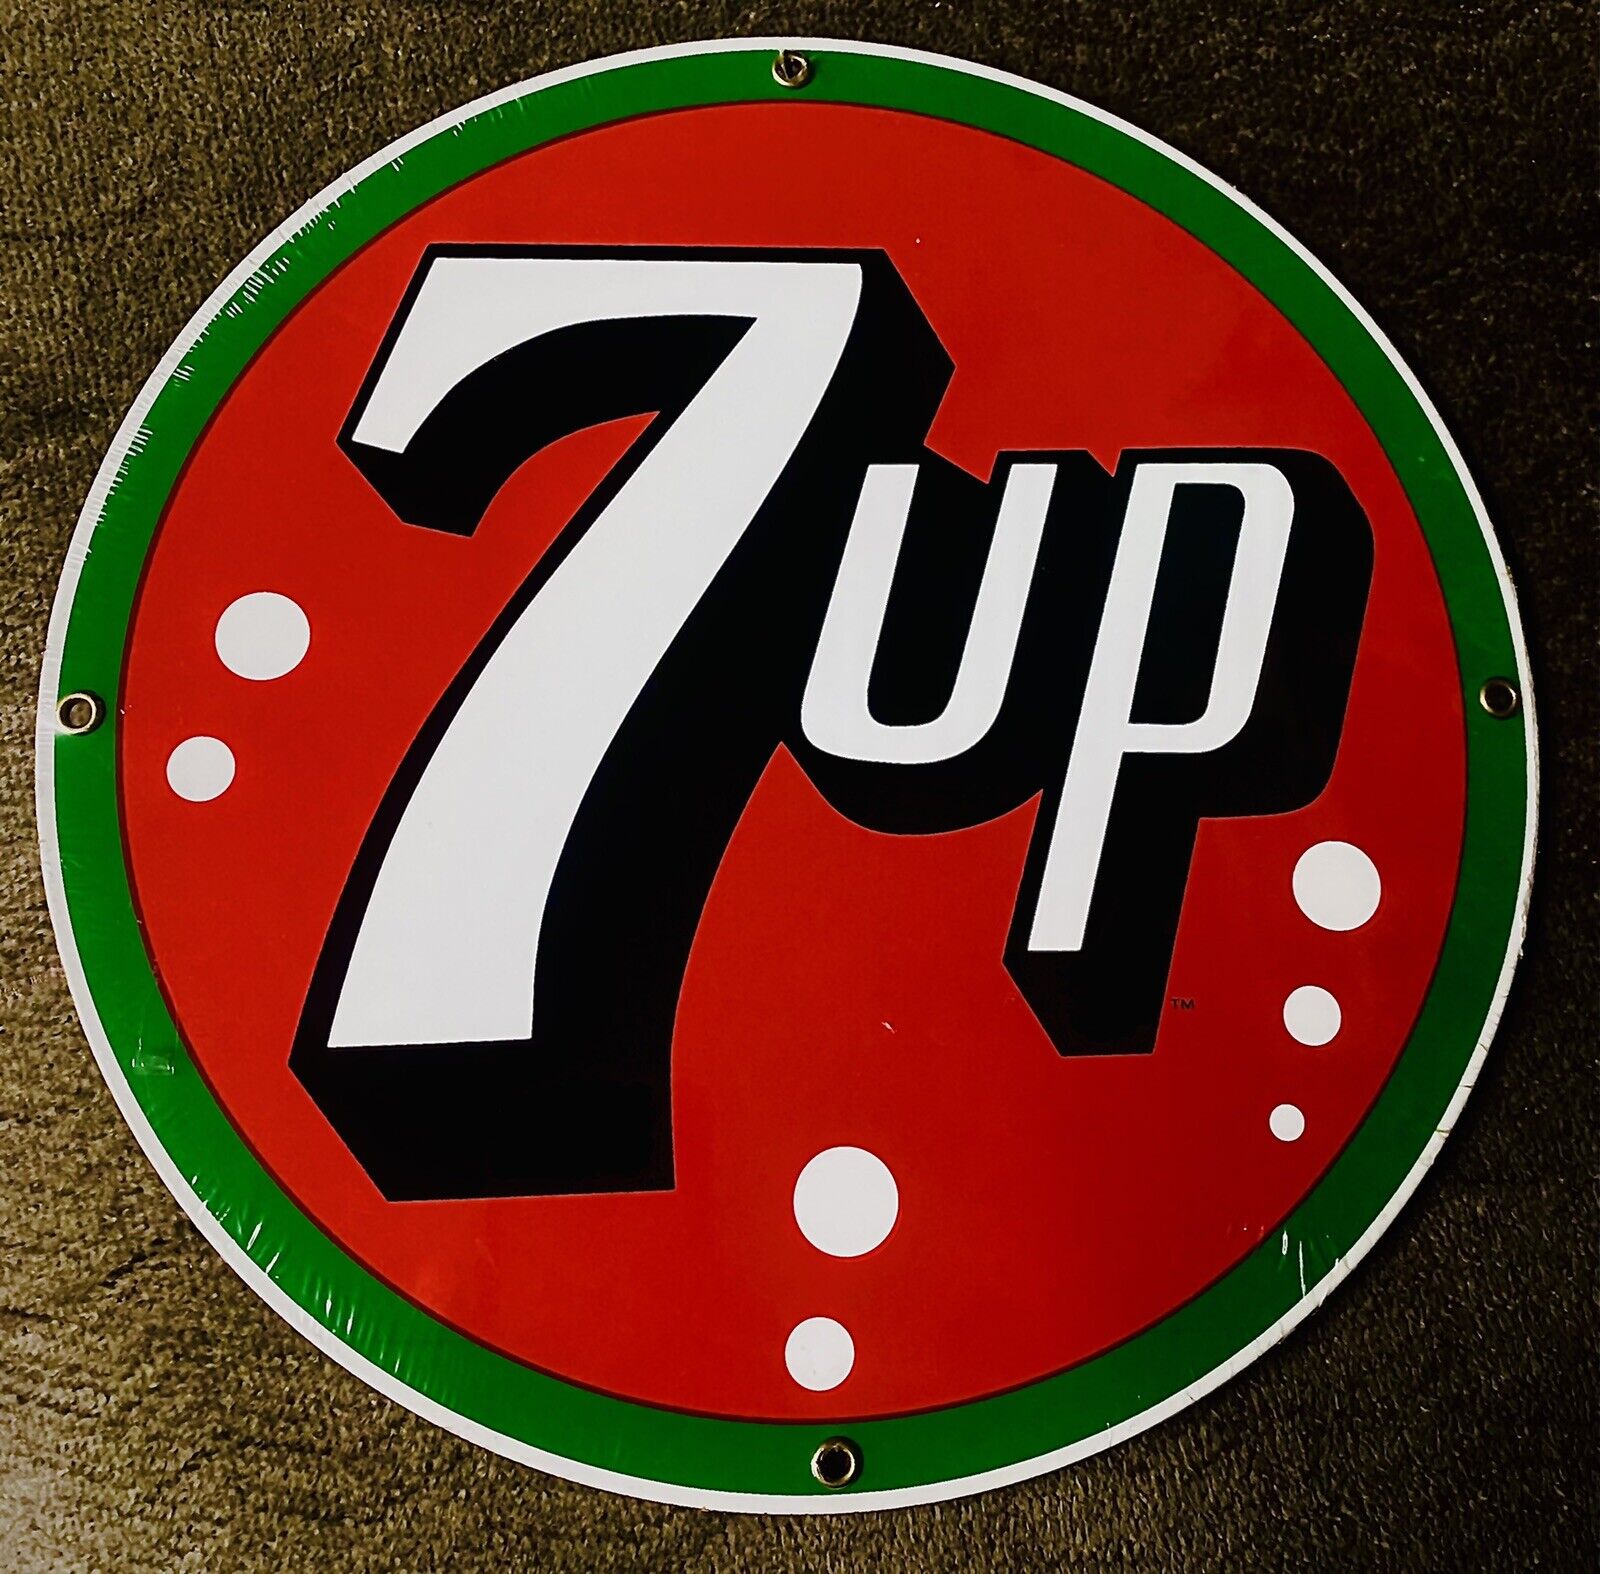 Vintage 7UP advertising sign.Authentic handcrafted by Andy Rooney.ORIG.packaging